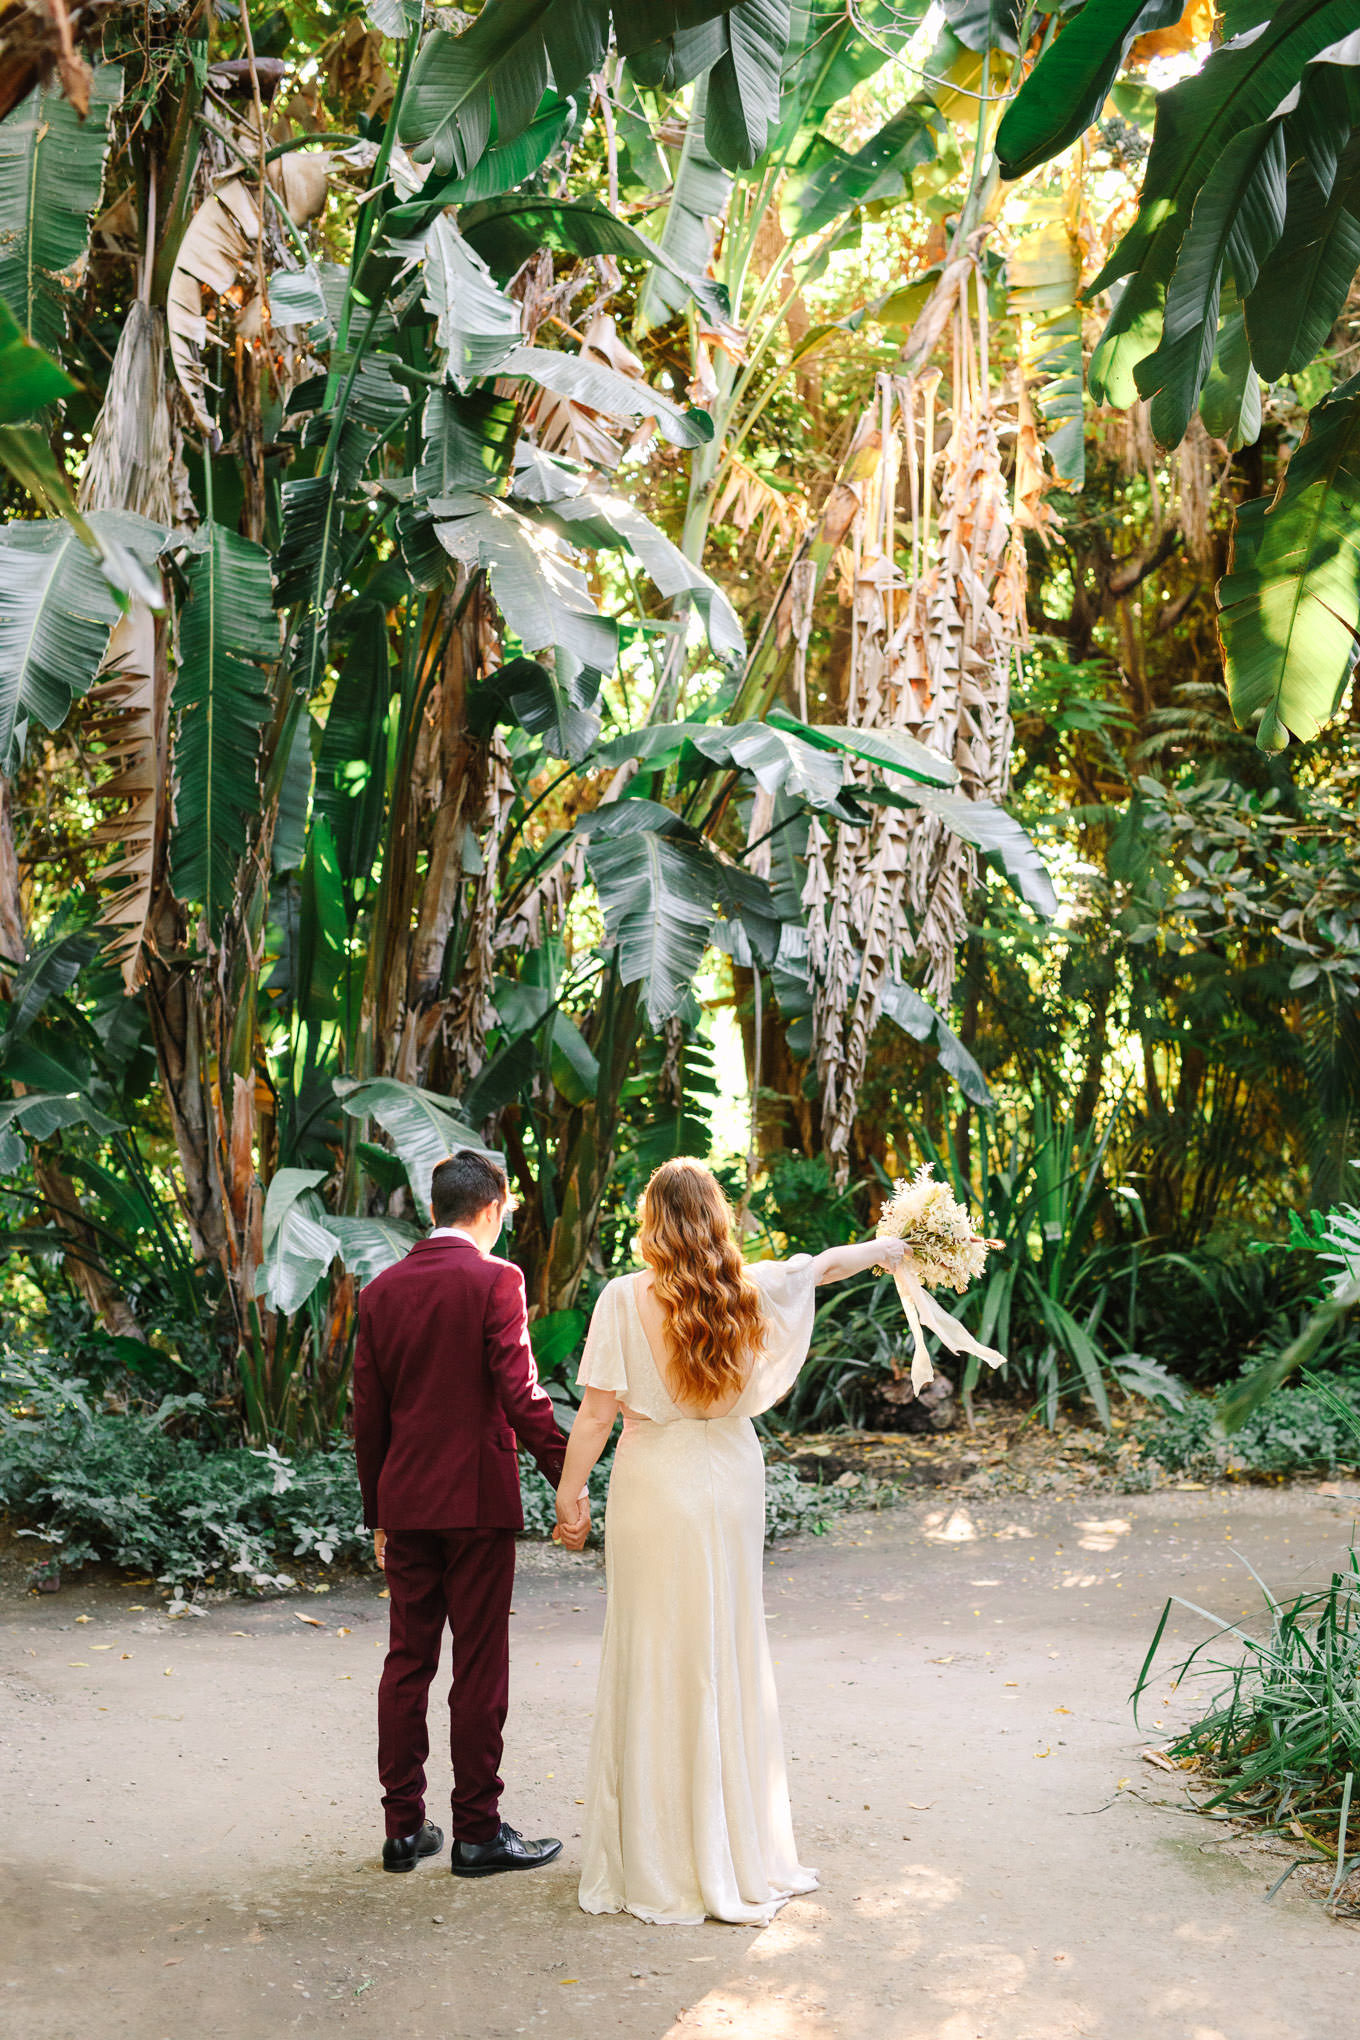 Couple exploring LA Arboretum | Los Angeles Arboretum Elopement | Colorful and elevated wedding photography for fun-loving couples in Southern California | #LosAngelesElopement #elopement #LAarboretum #LAskyline #elopementphotos   Source: Mary Costa Photography | Los Angeles